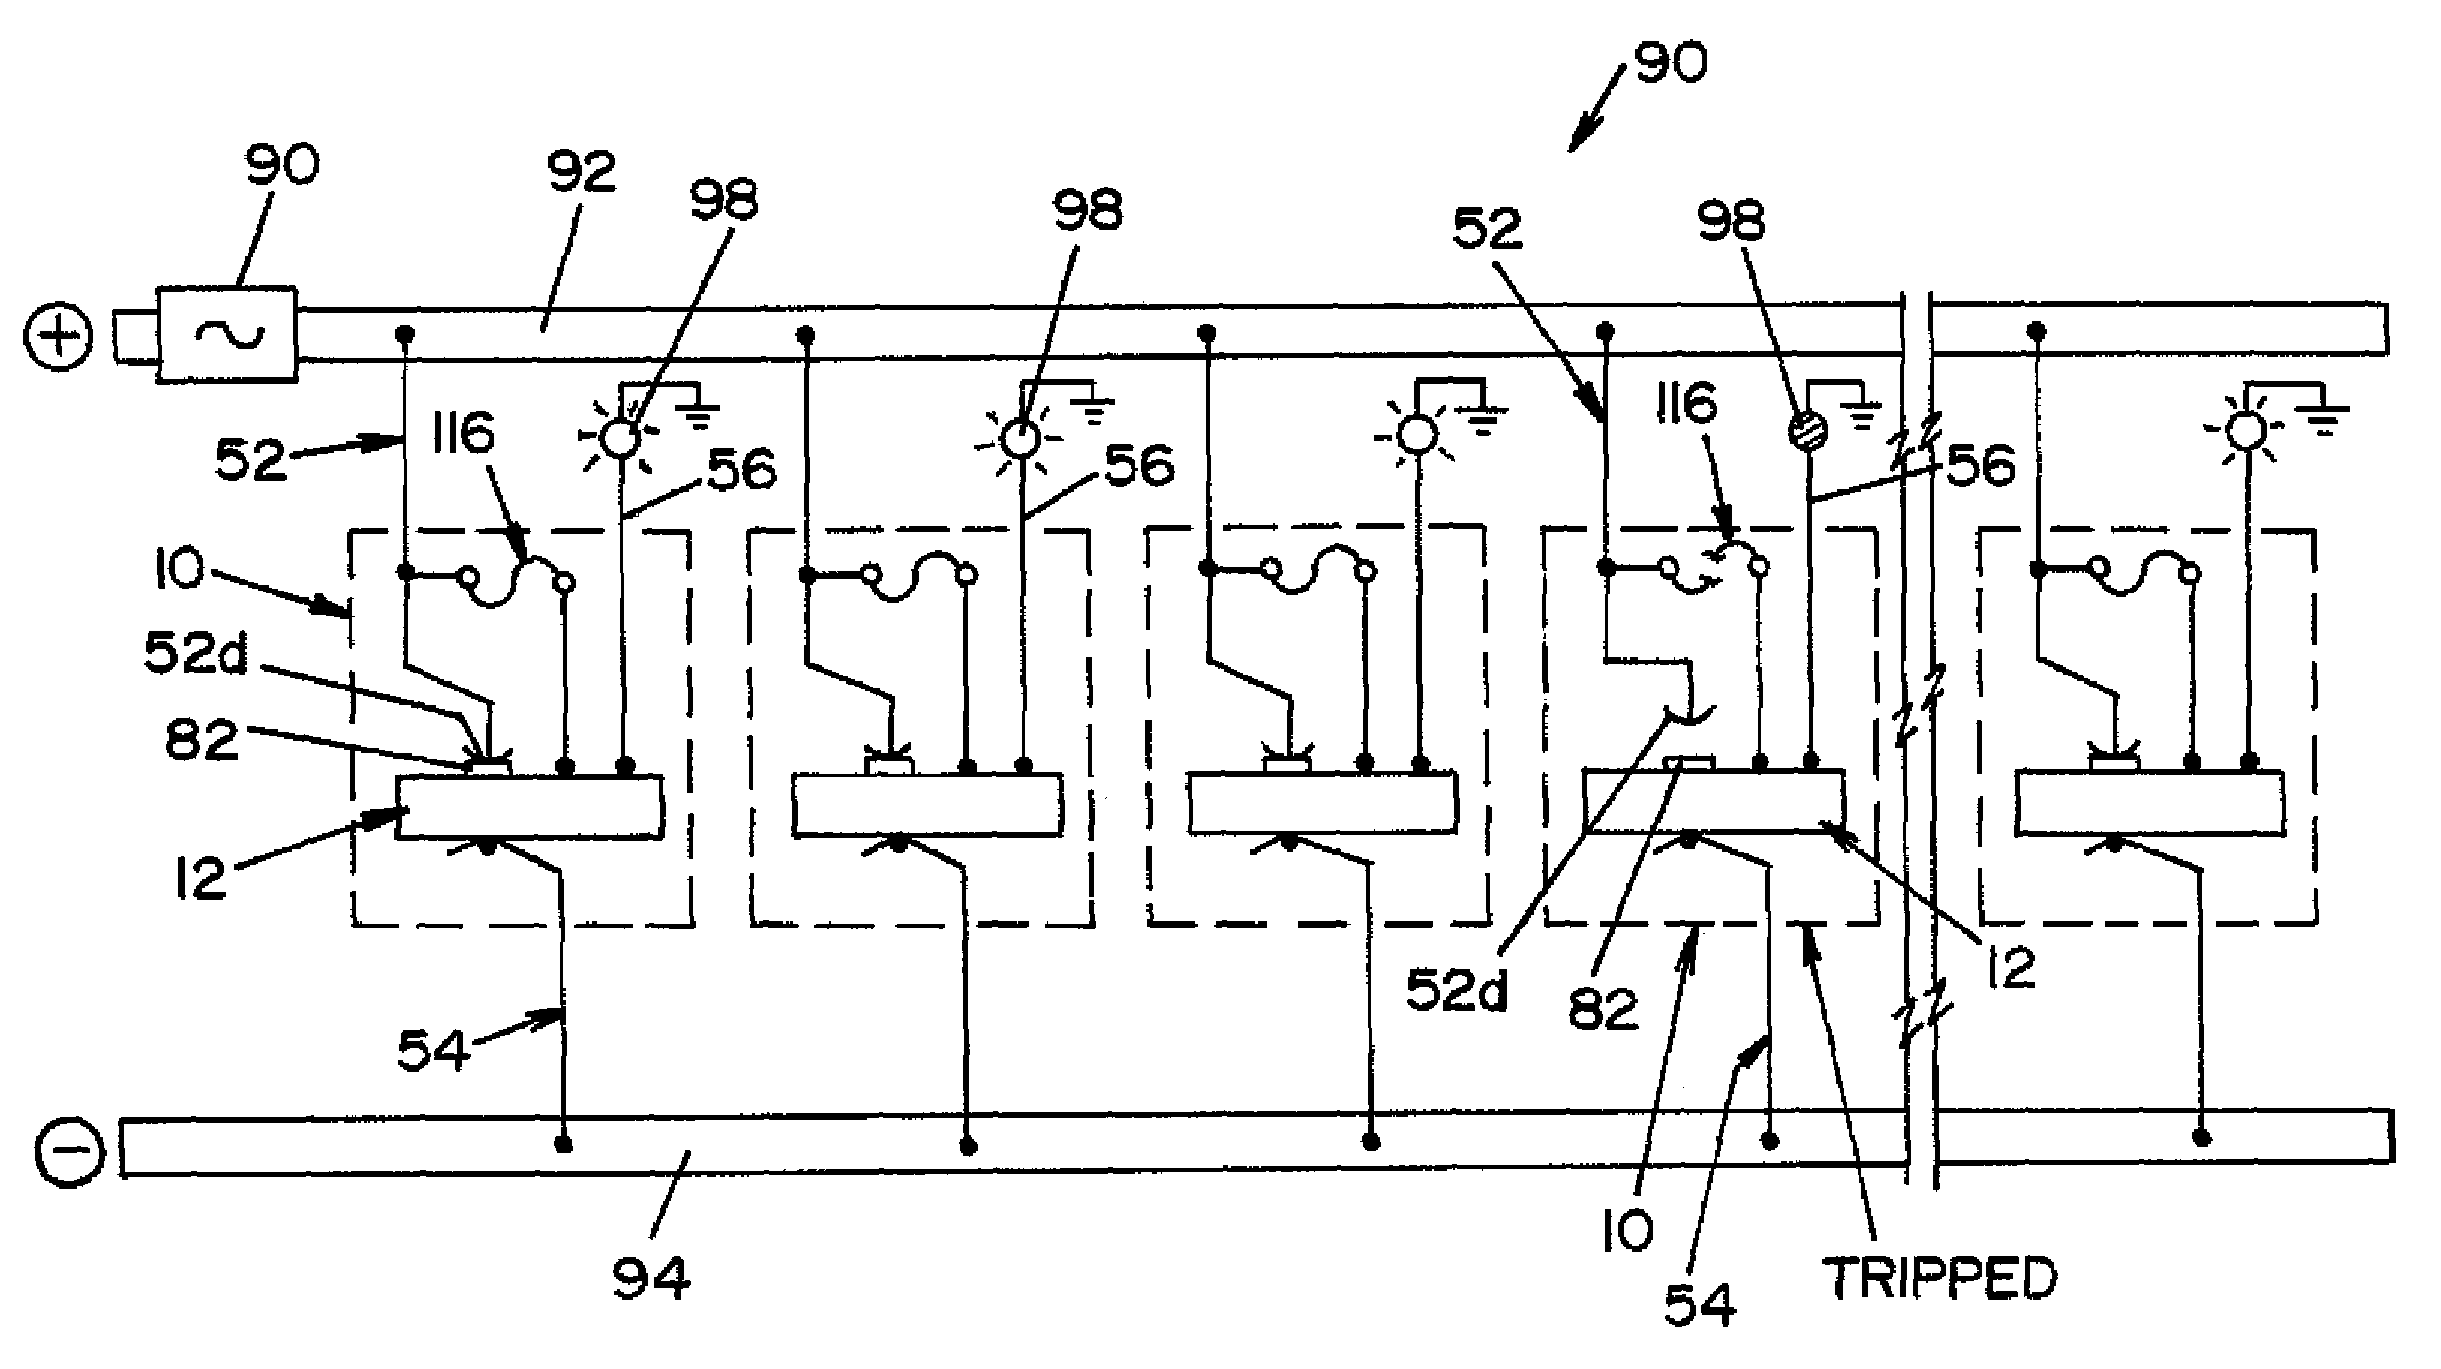 Circuit protection device